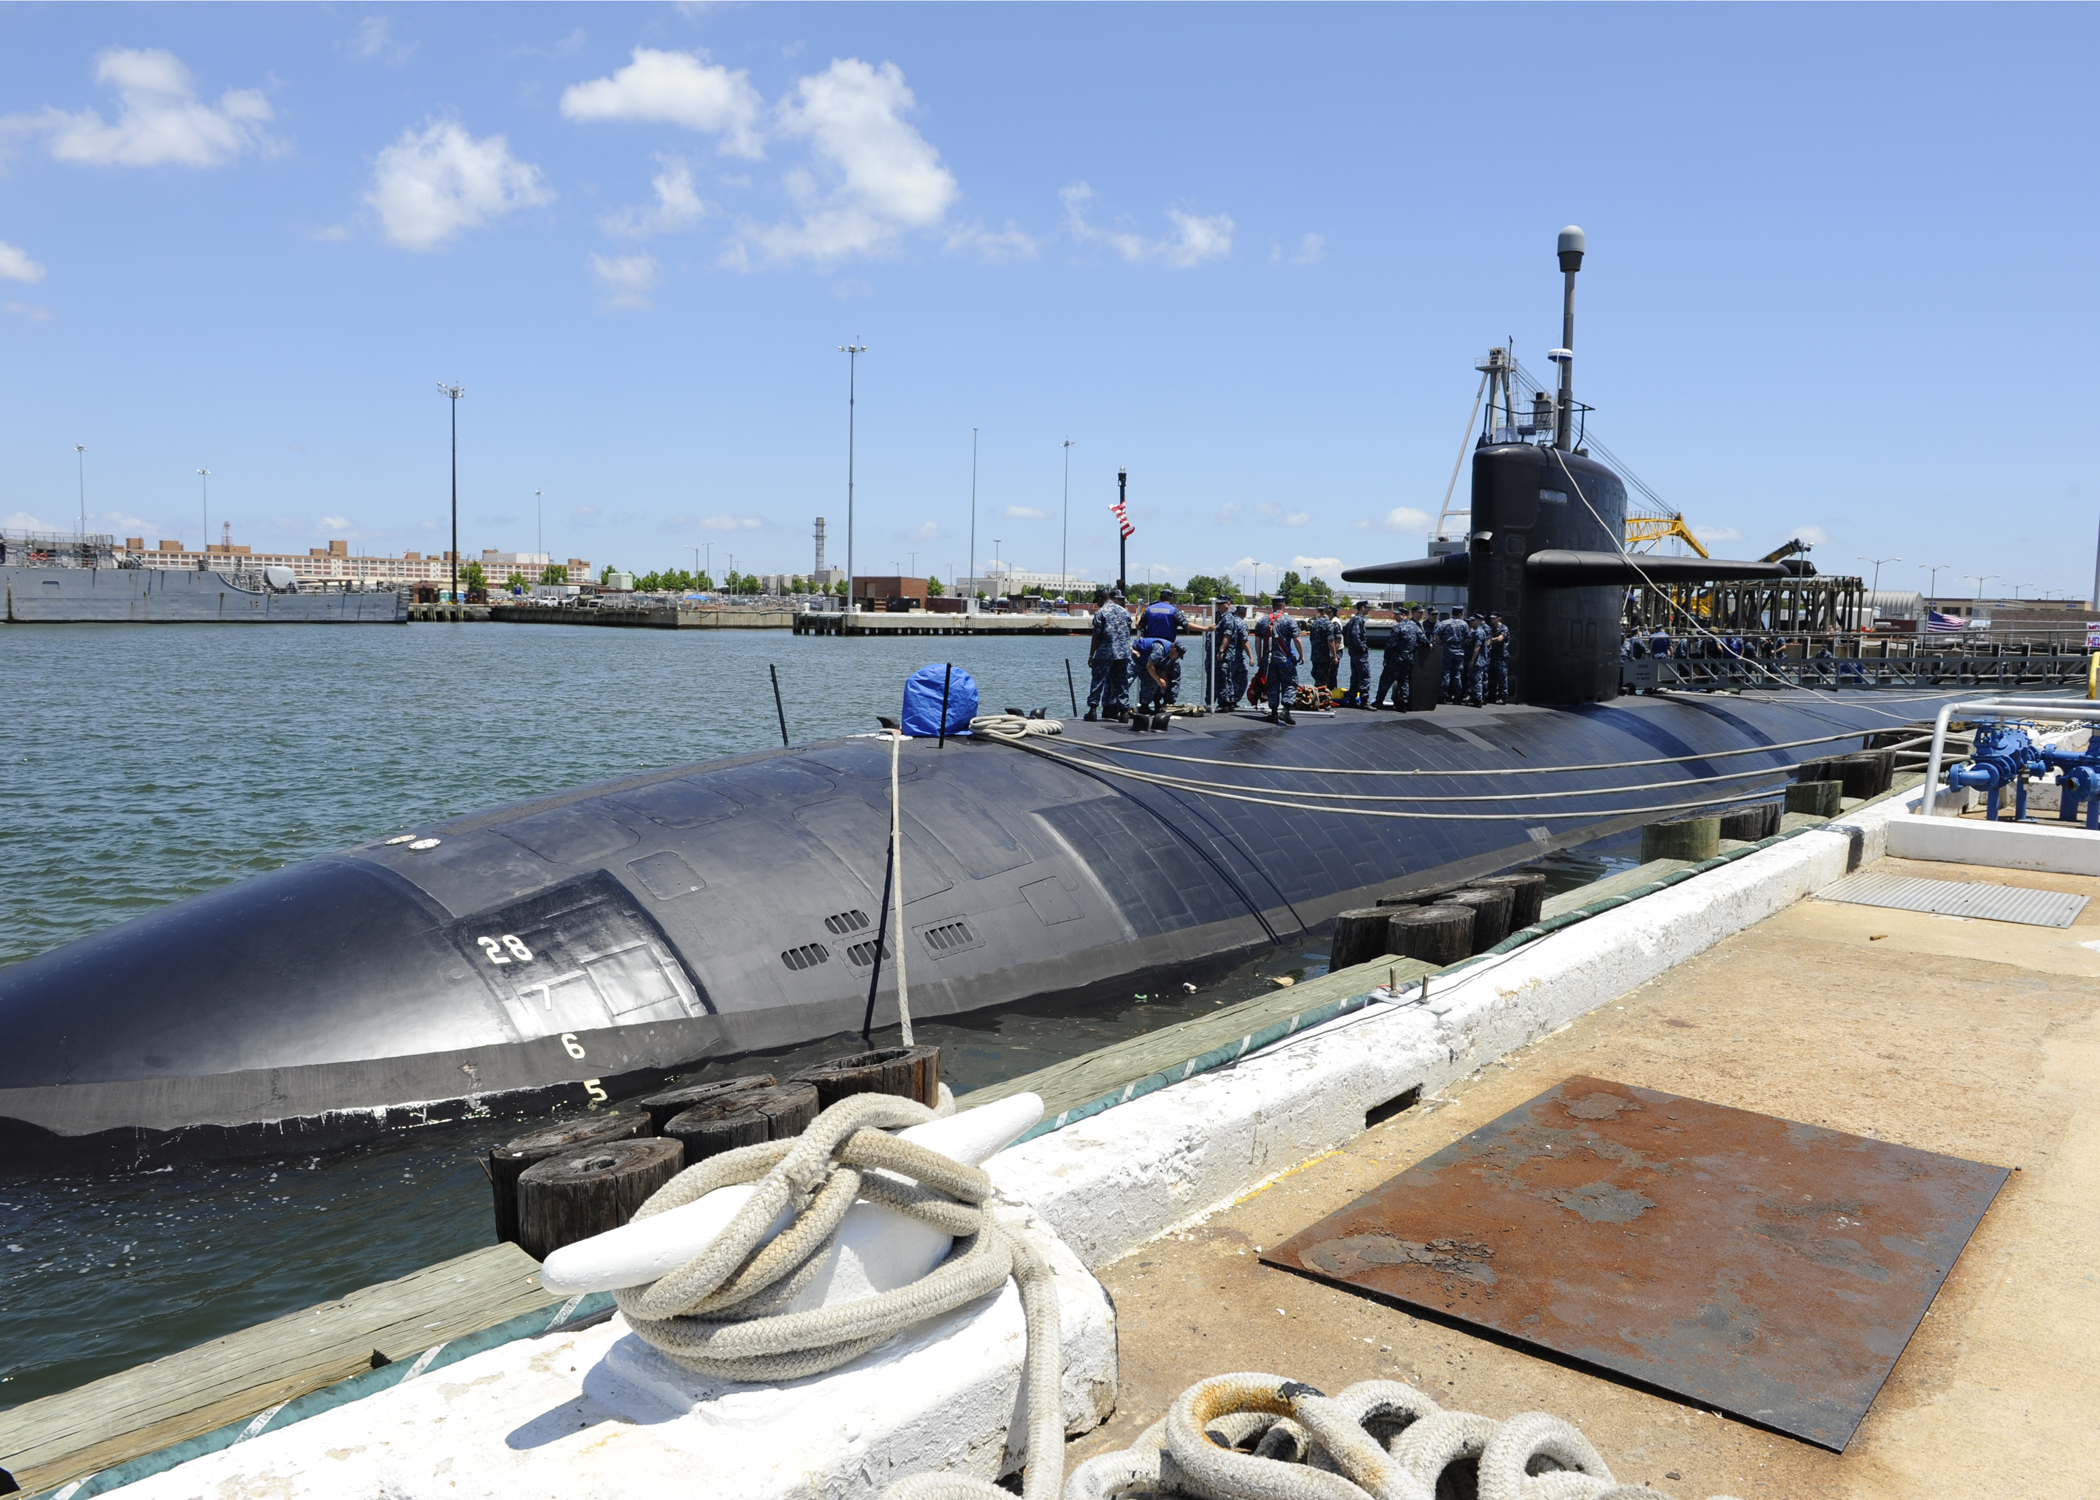 US_Navy_110615-N-XX999-130_Sailors_aboard_the_Los_Angeles-class_submarine_USS_Helena_%28SSN_725%29_prepare_to_depart_the_boat_after_arriving_pier_side.jpg